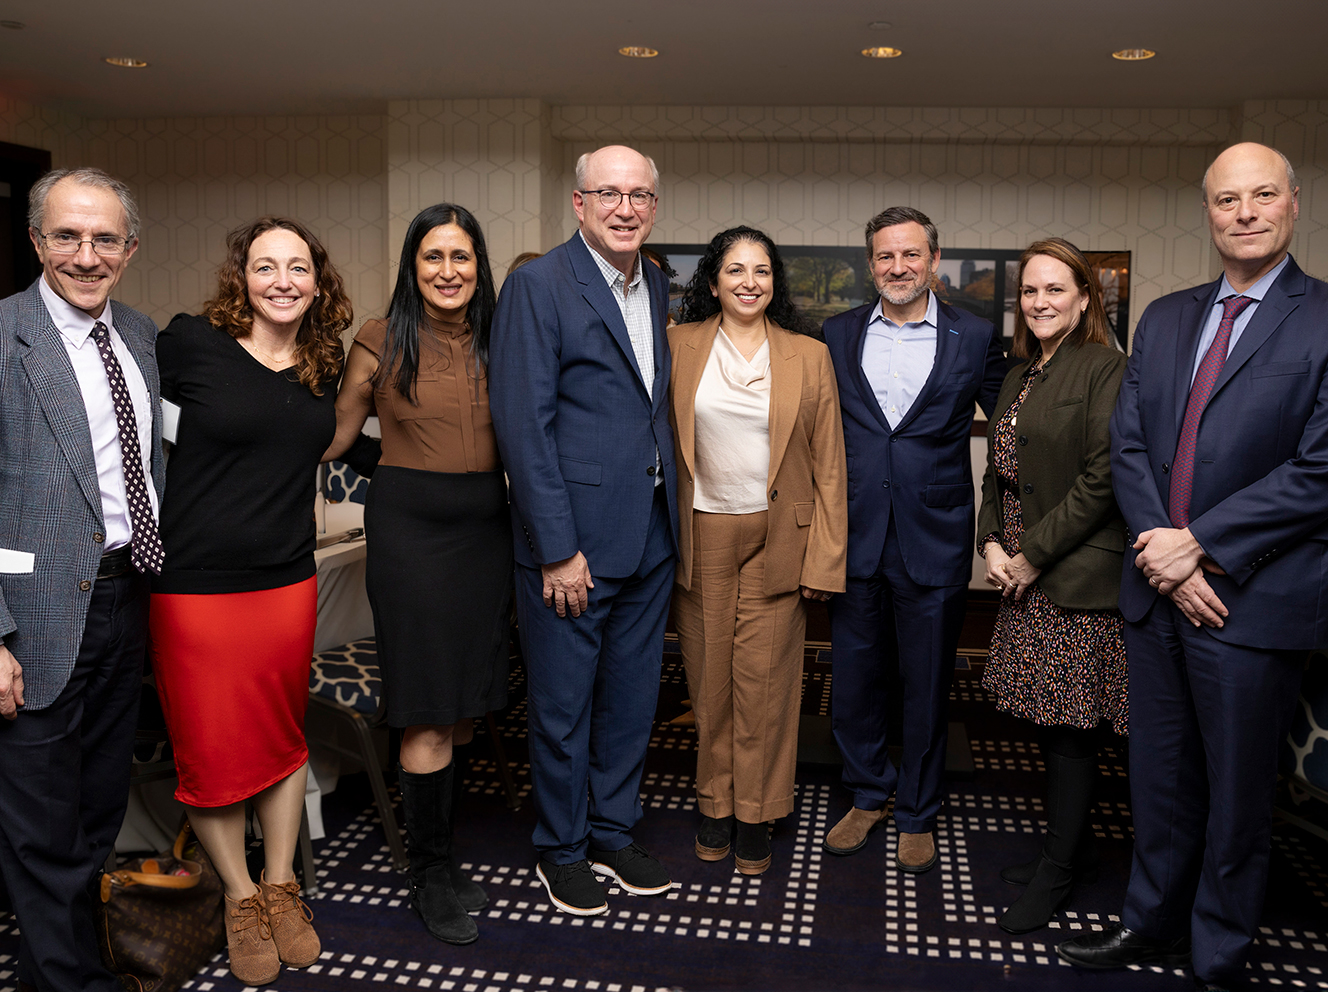 MGH ELEVATE: Innovative Leadership Program Expands to All Faculty